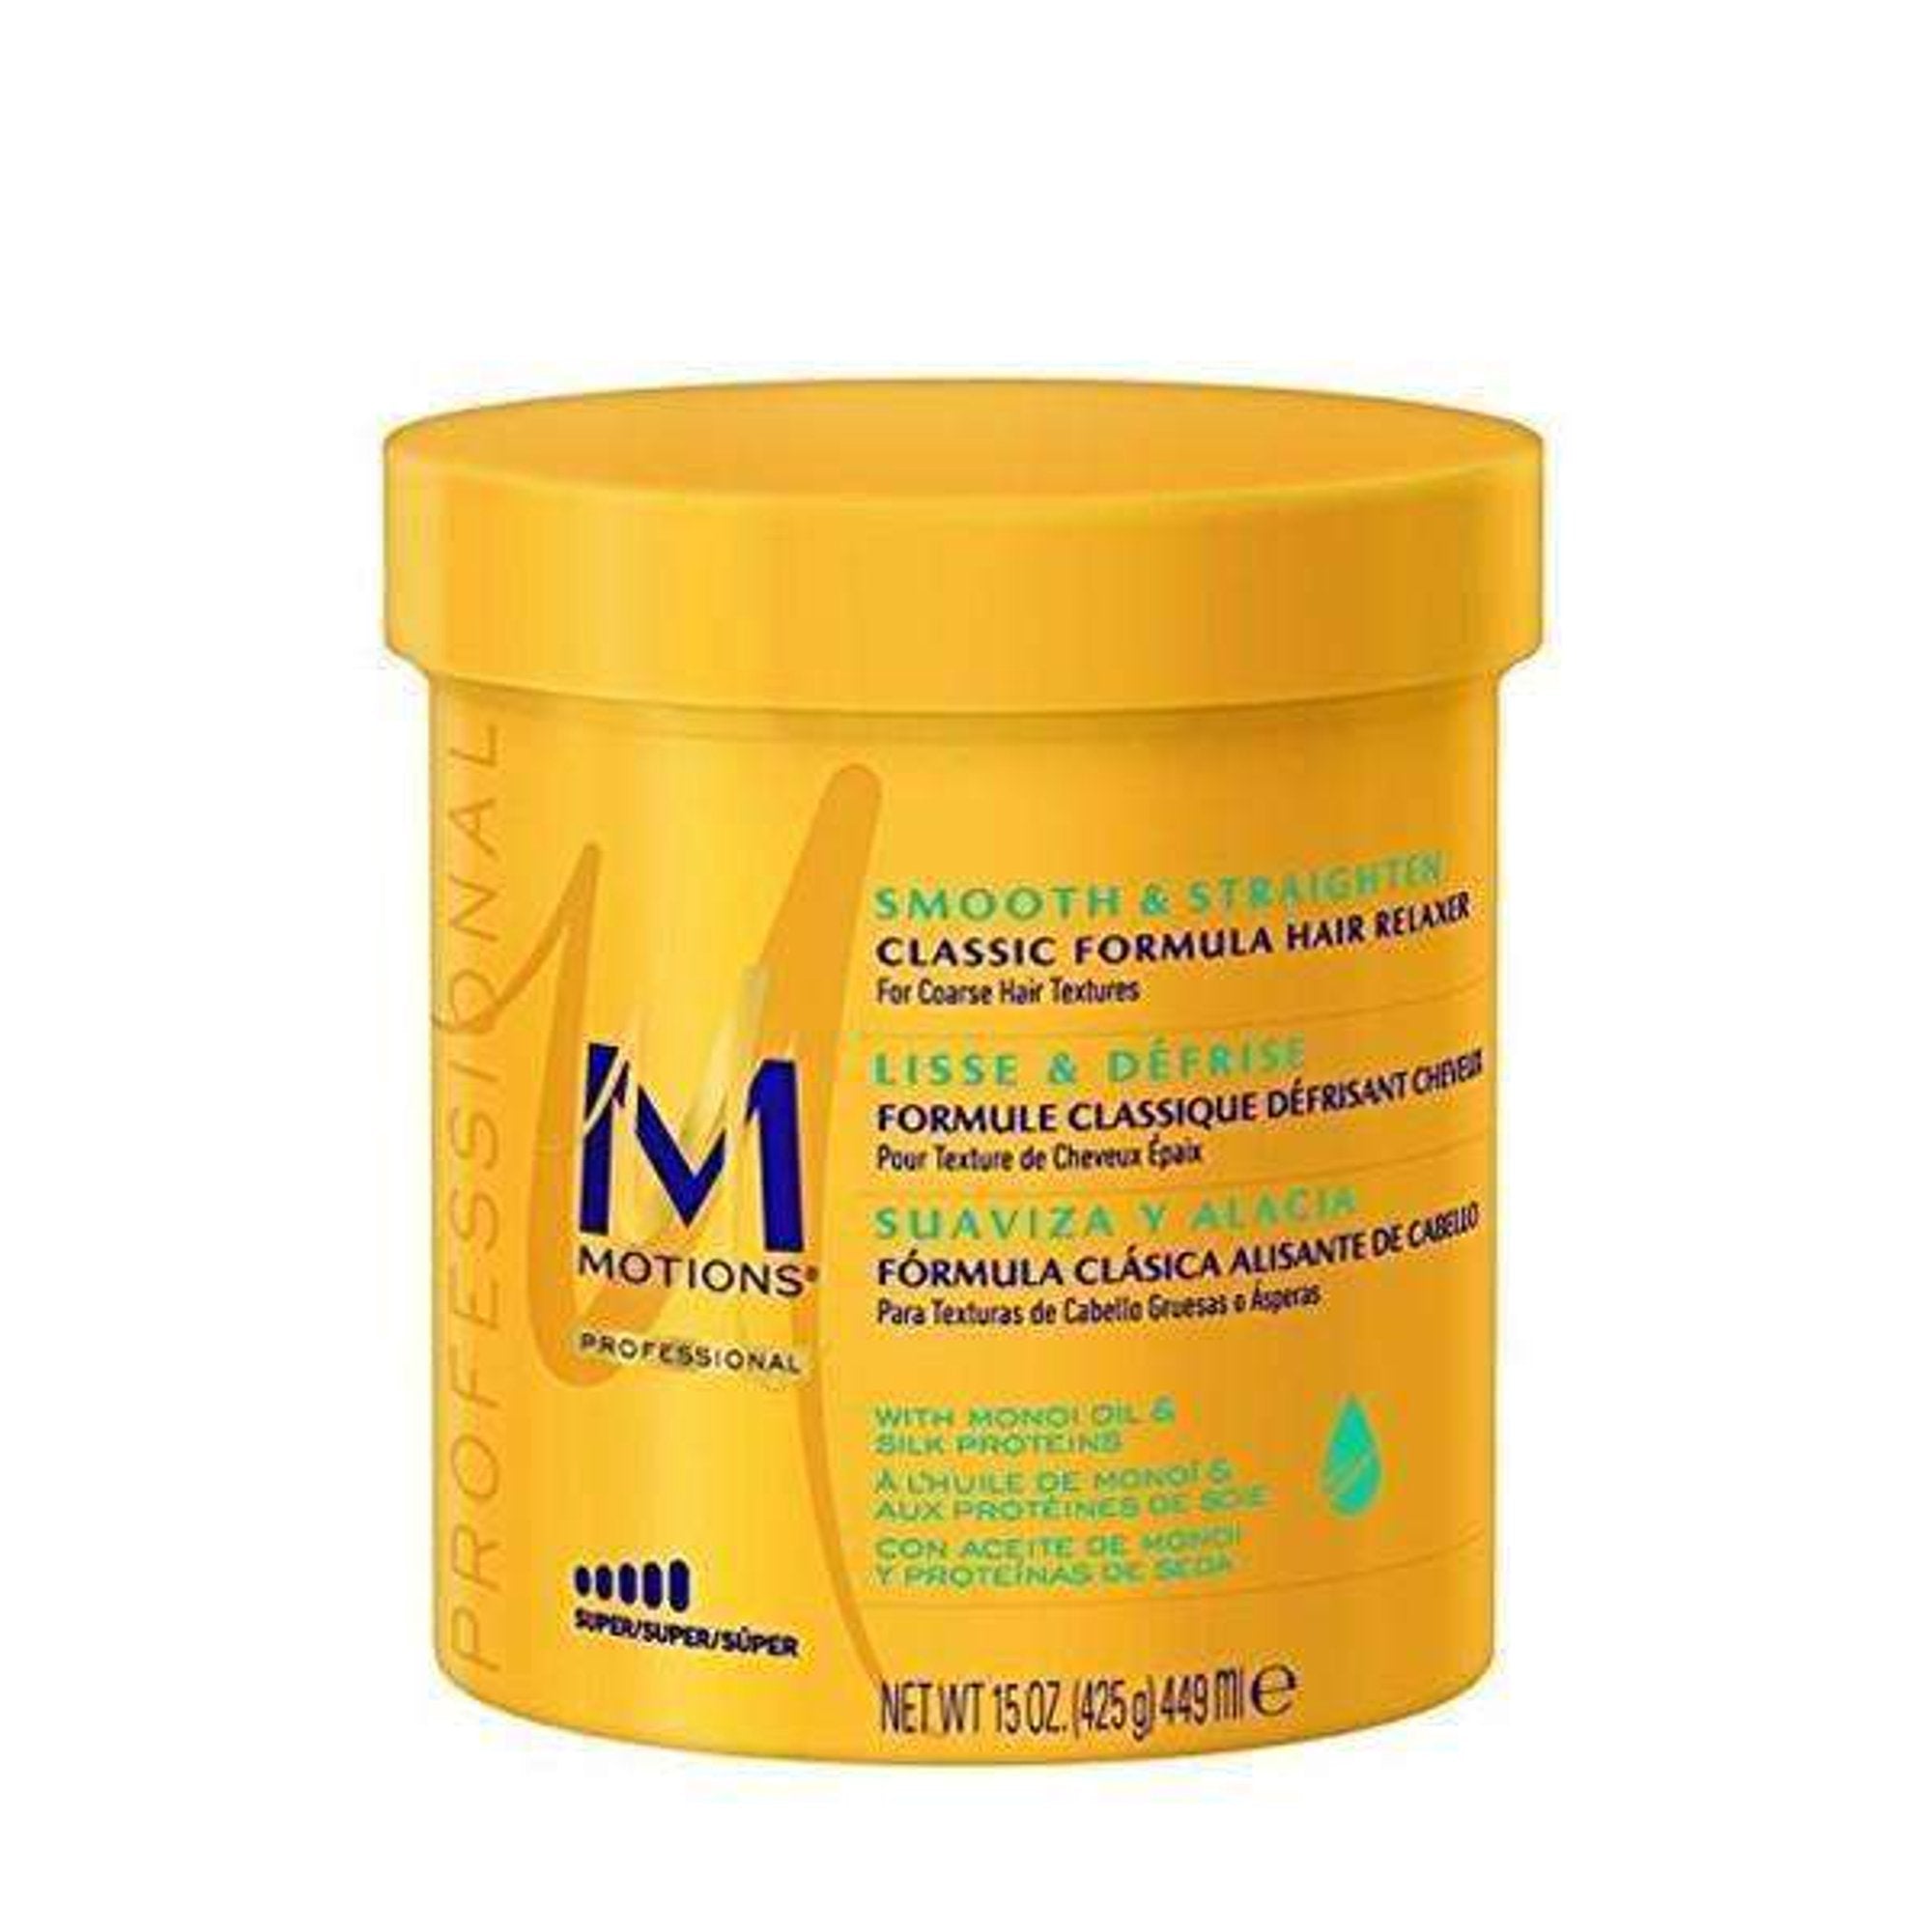 MOTIONS SUPER HAIR RELAXER 15oz-Motions- Hive Beauty Supply